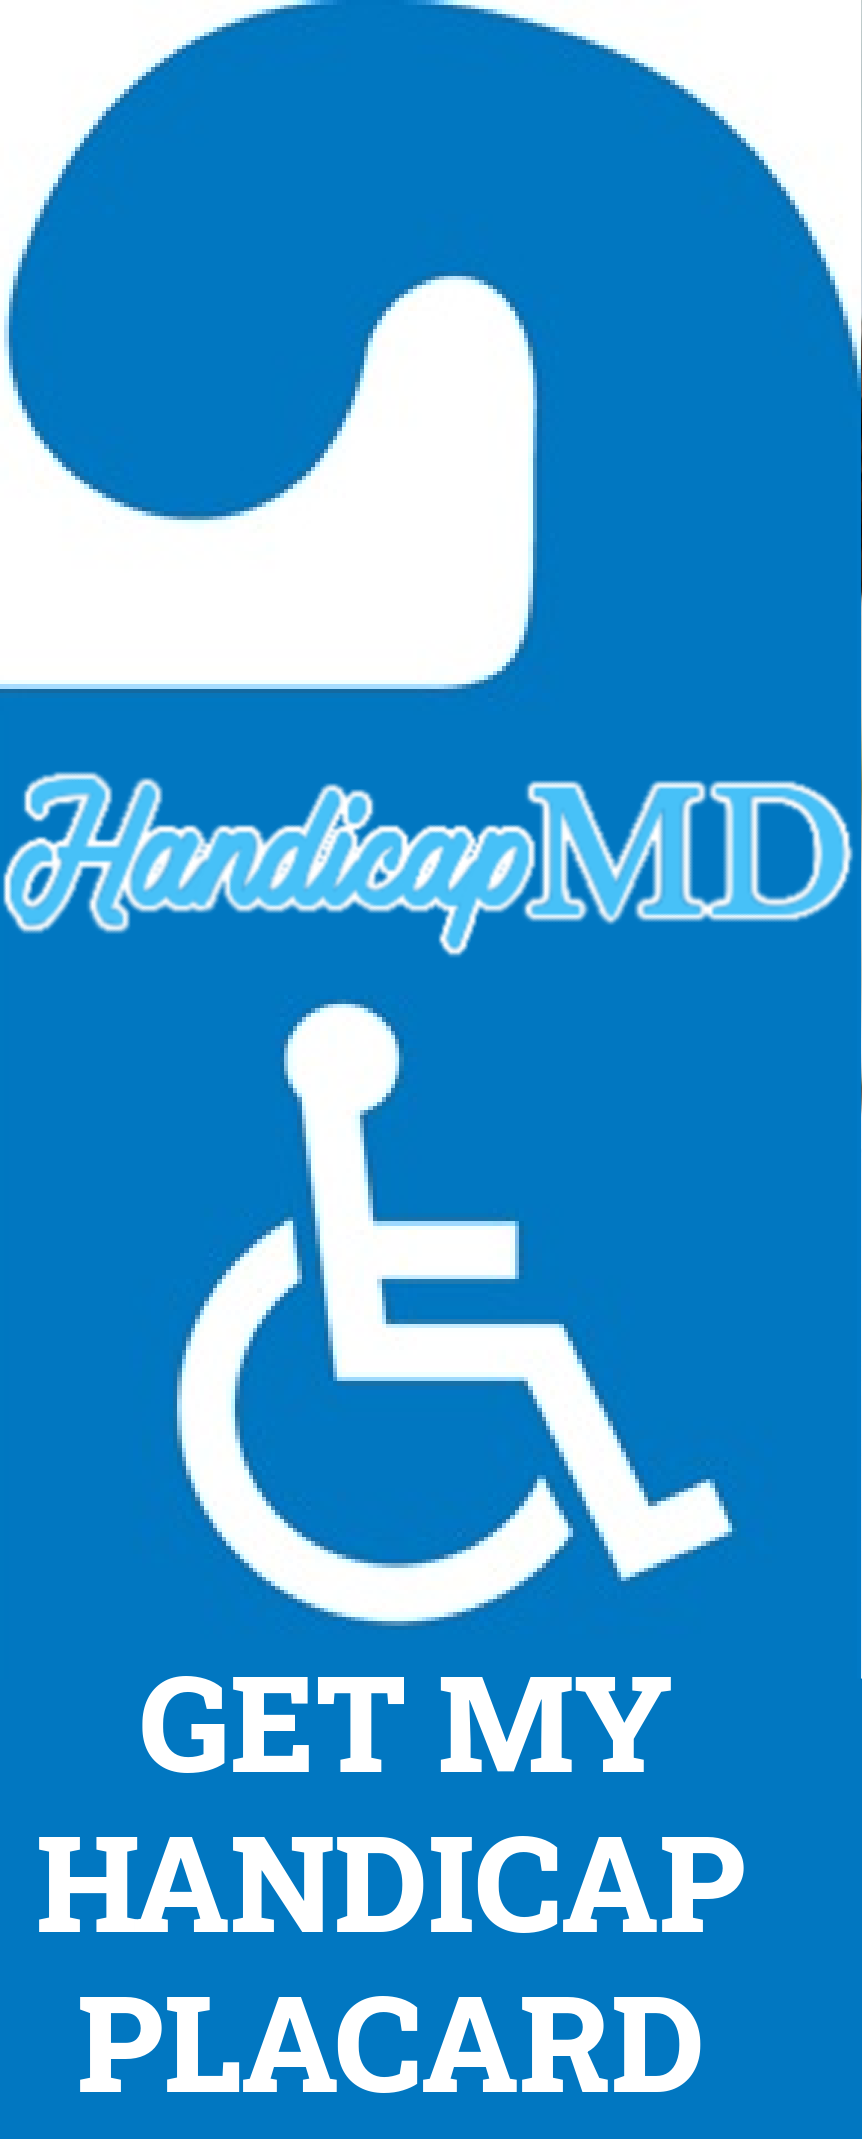 How to Replace a Lost or Stolen Handicap Placard in Alabama